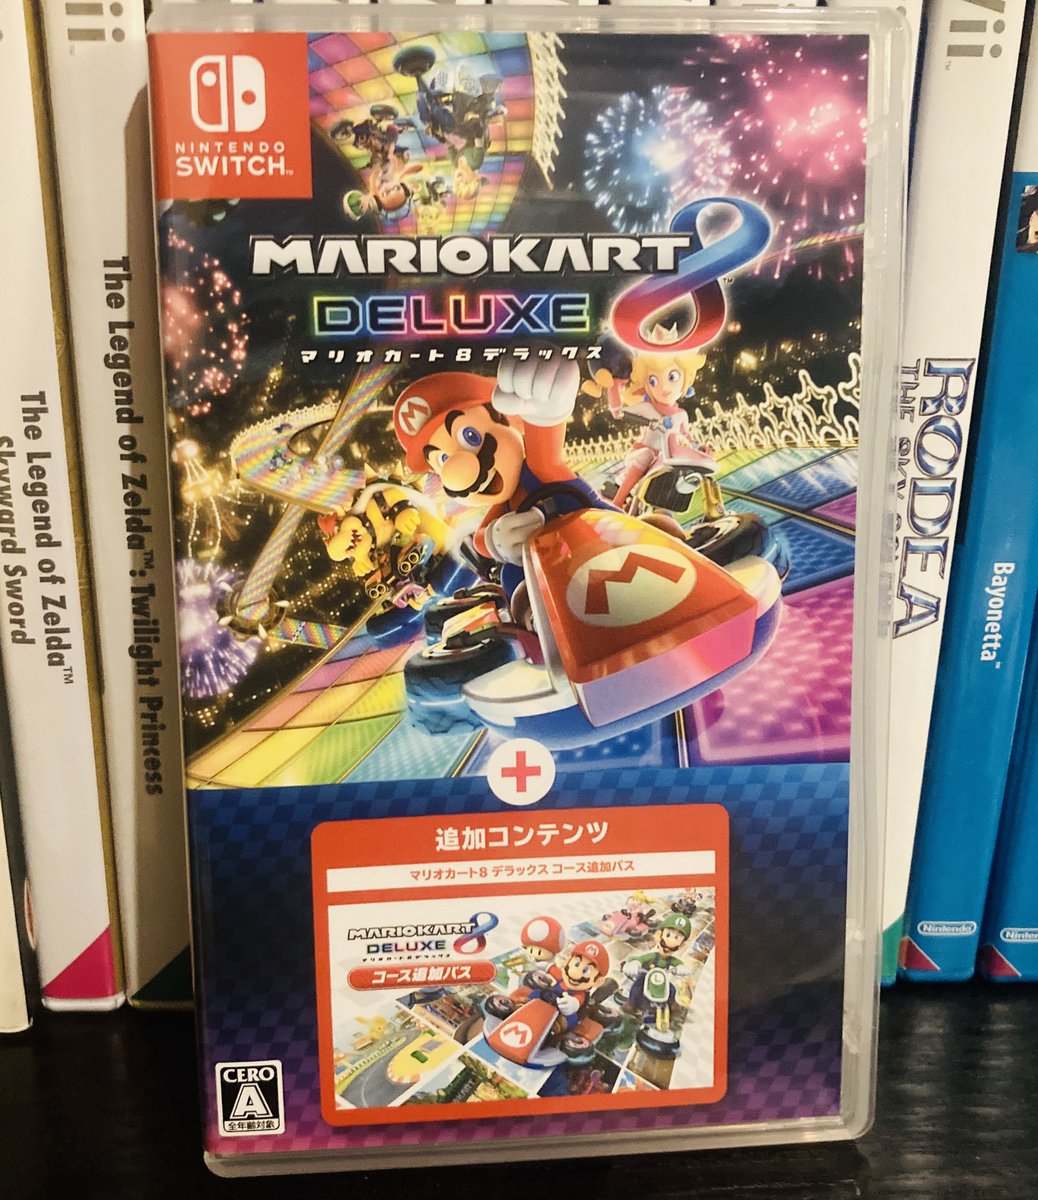 Mario Kart 8 + Booster Pass just arrived from Play Asia. It includes everything on cart except Wave 6. (Which it downloads) #MarioKart8Deluxe #Nintendo #mario